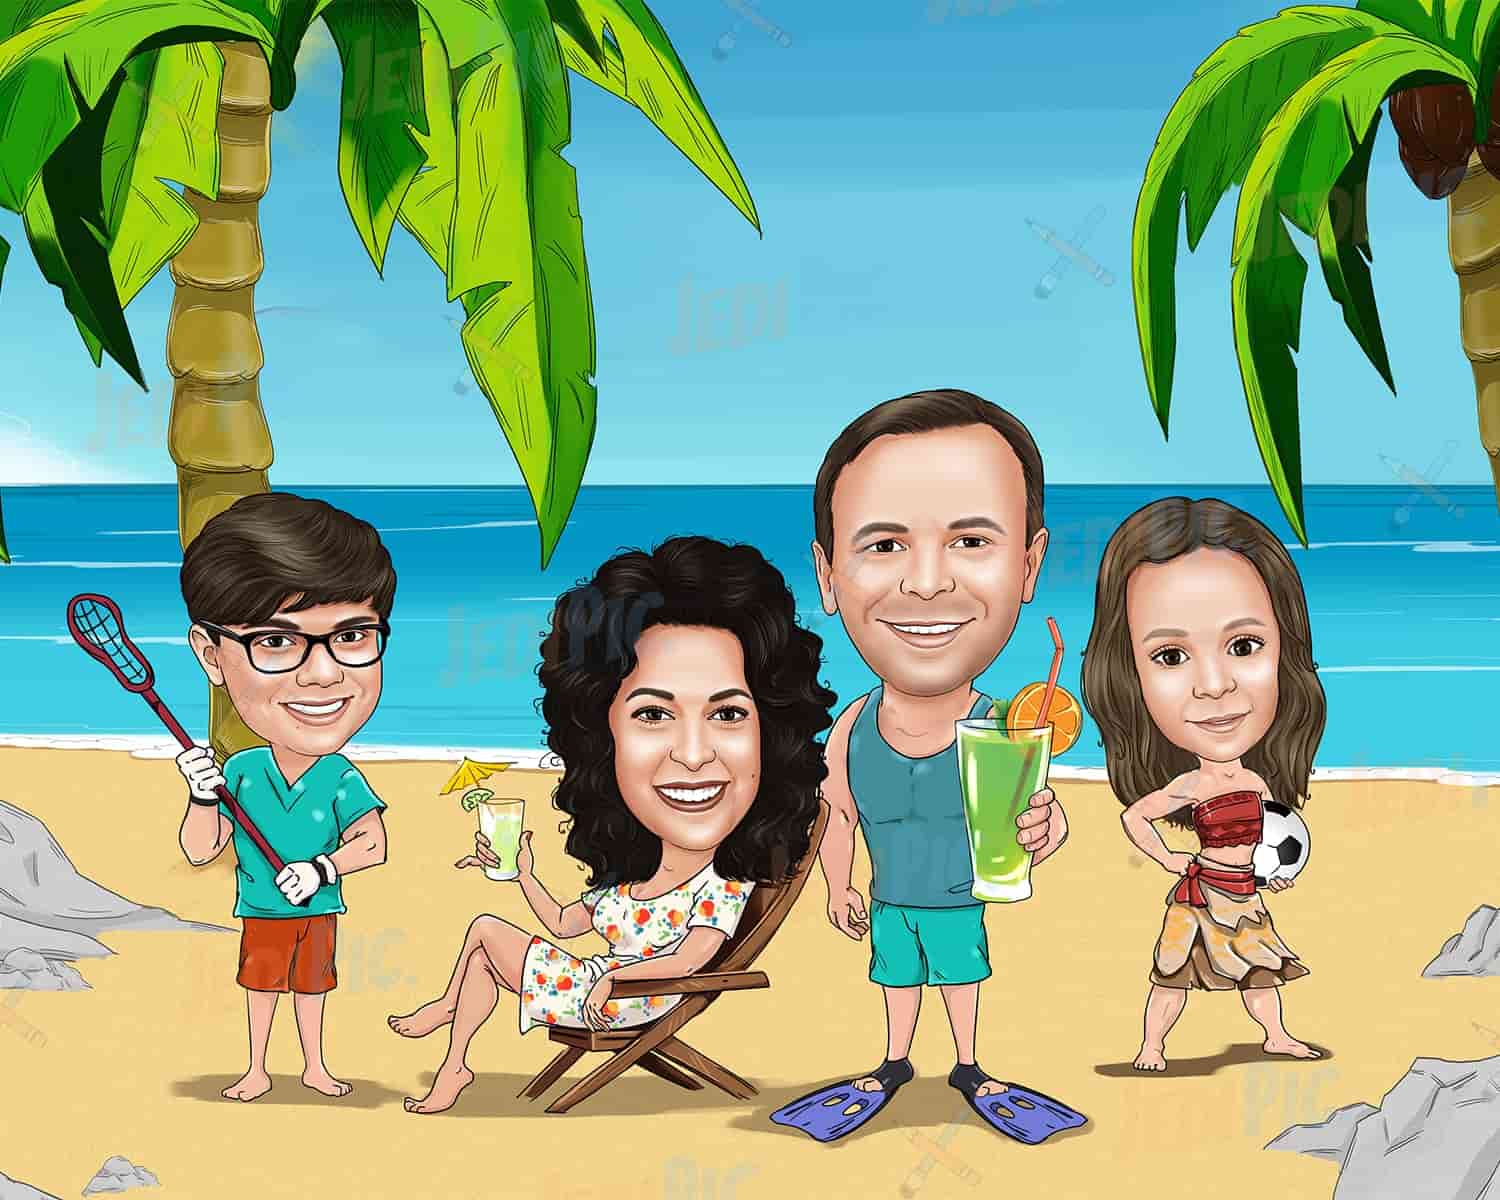 Caricature Drawing Family on Vacation in Digital Style